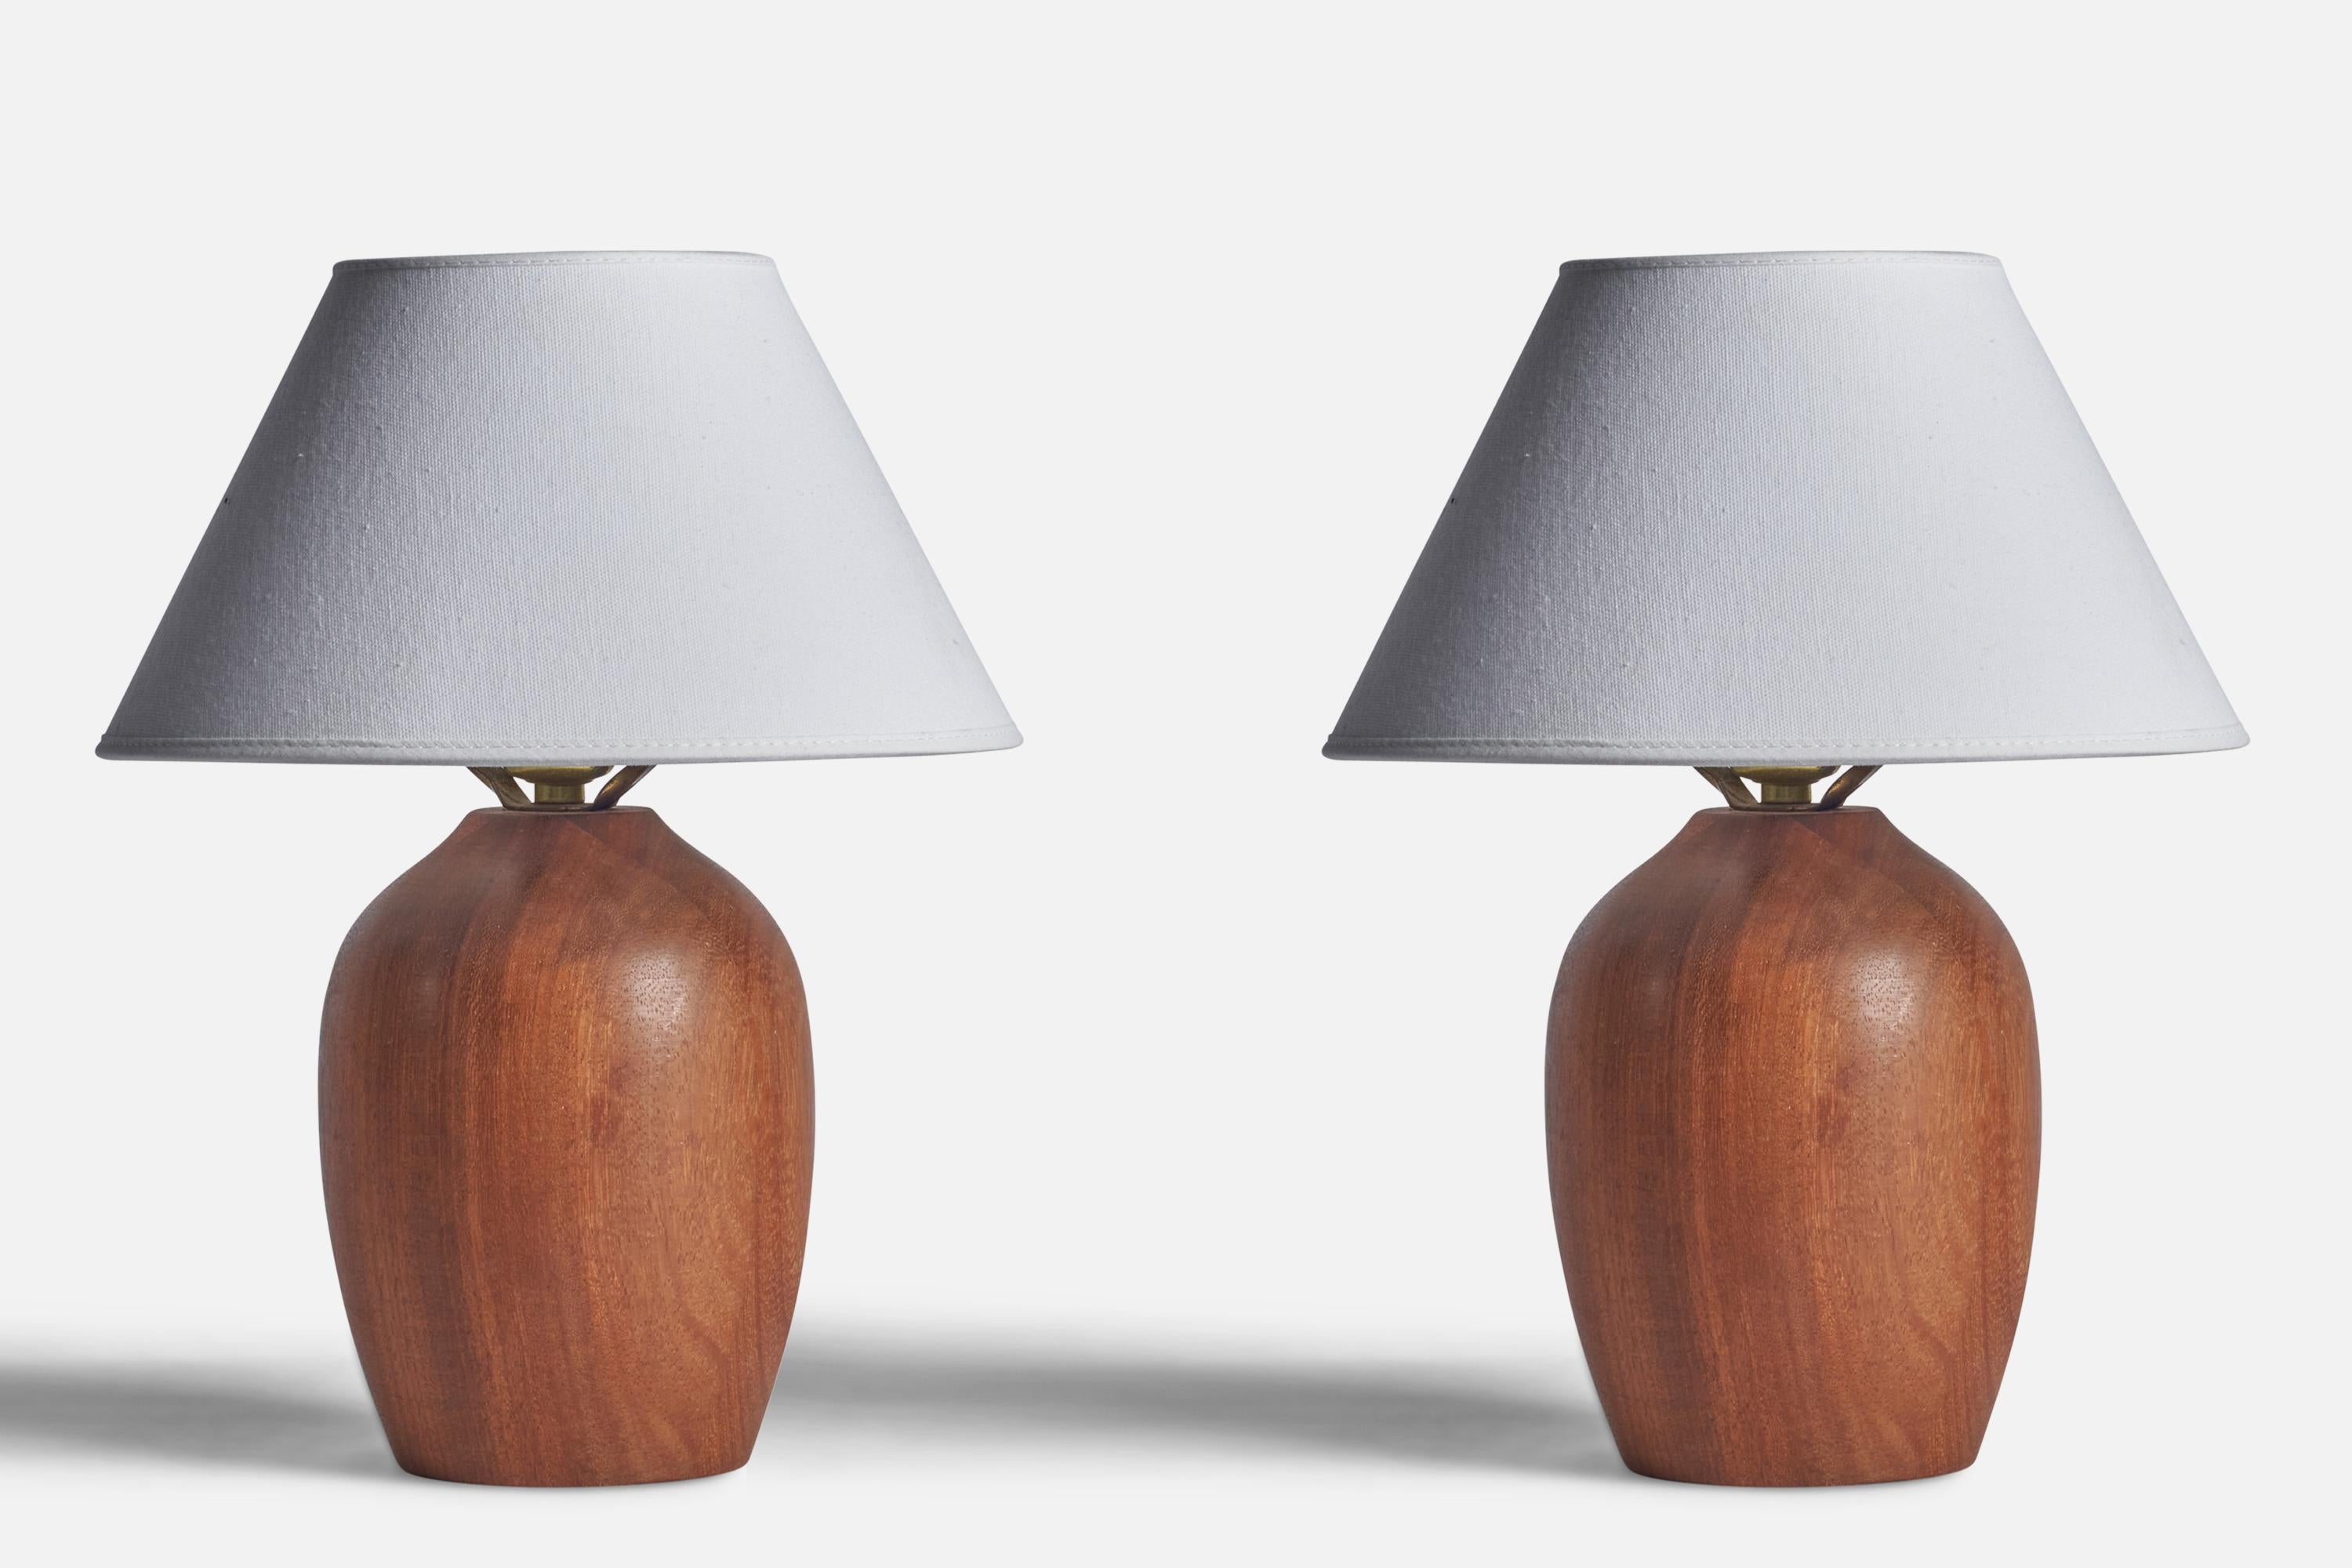 A pair of teak table lamps designed and produced in the US, 1950s.

Dimensions of Lamp (inches): 9.75” H x 5.35” D
Dimensions of Shade (inches): 4.5” Top Diameter x 10” Bottom Diameter x 5.25” H 
Dimensions of Lamp with Shade (inches): 13.2” H x 10”